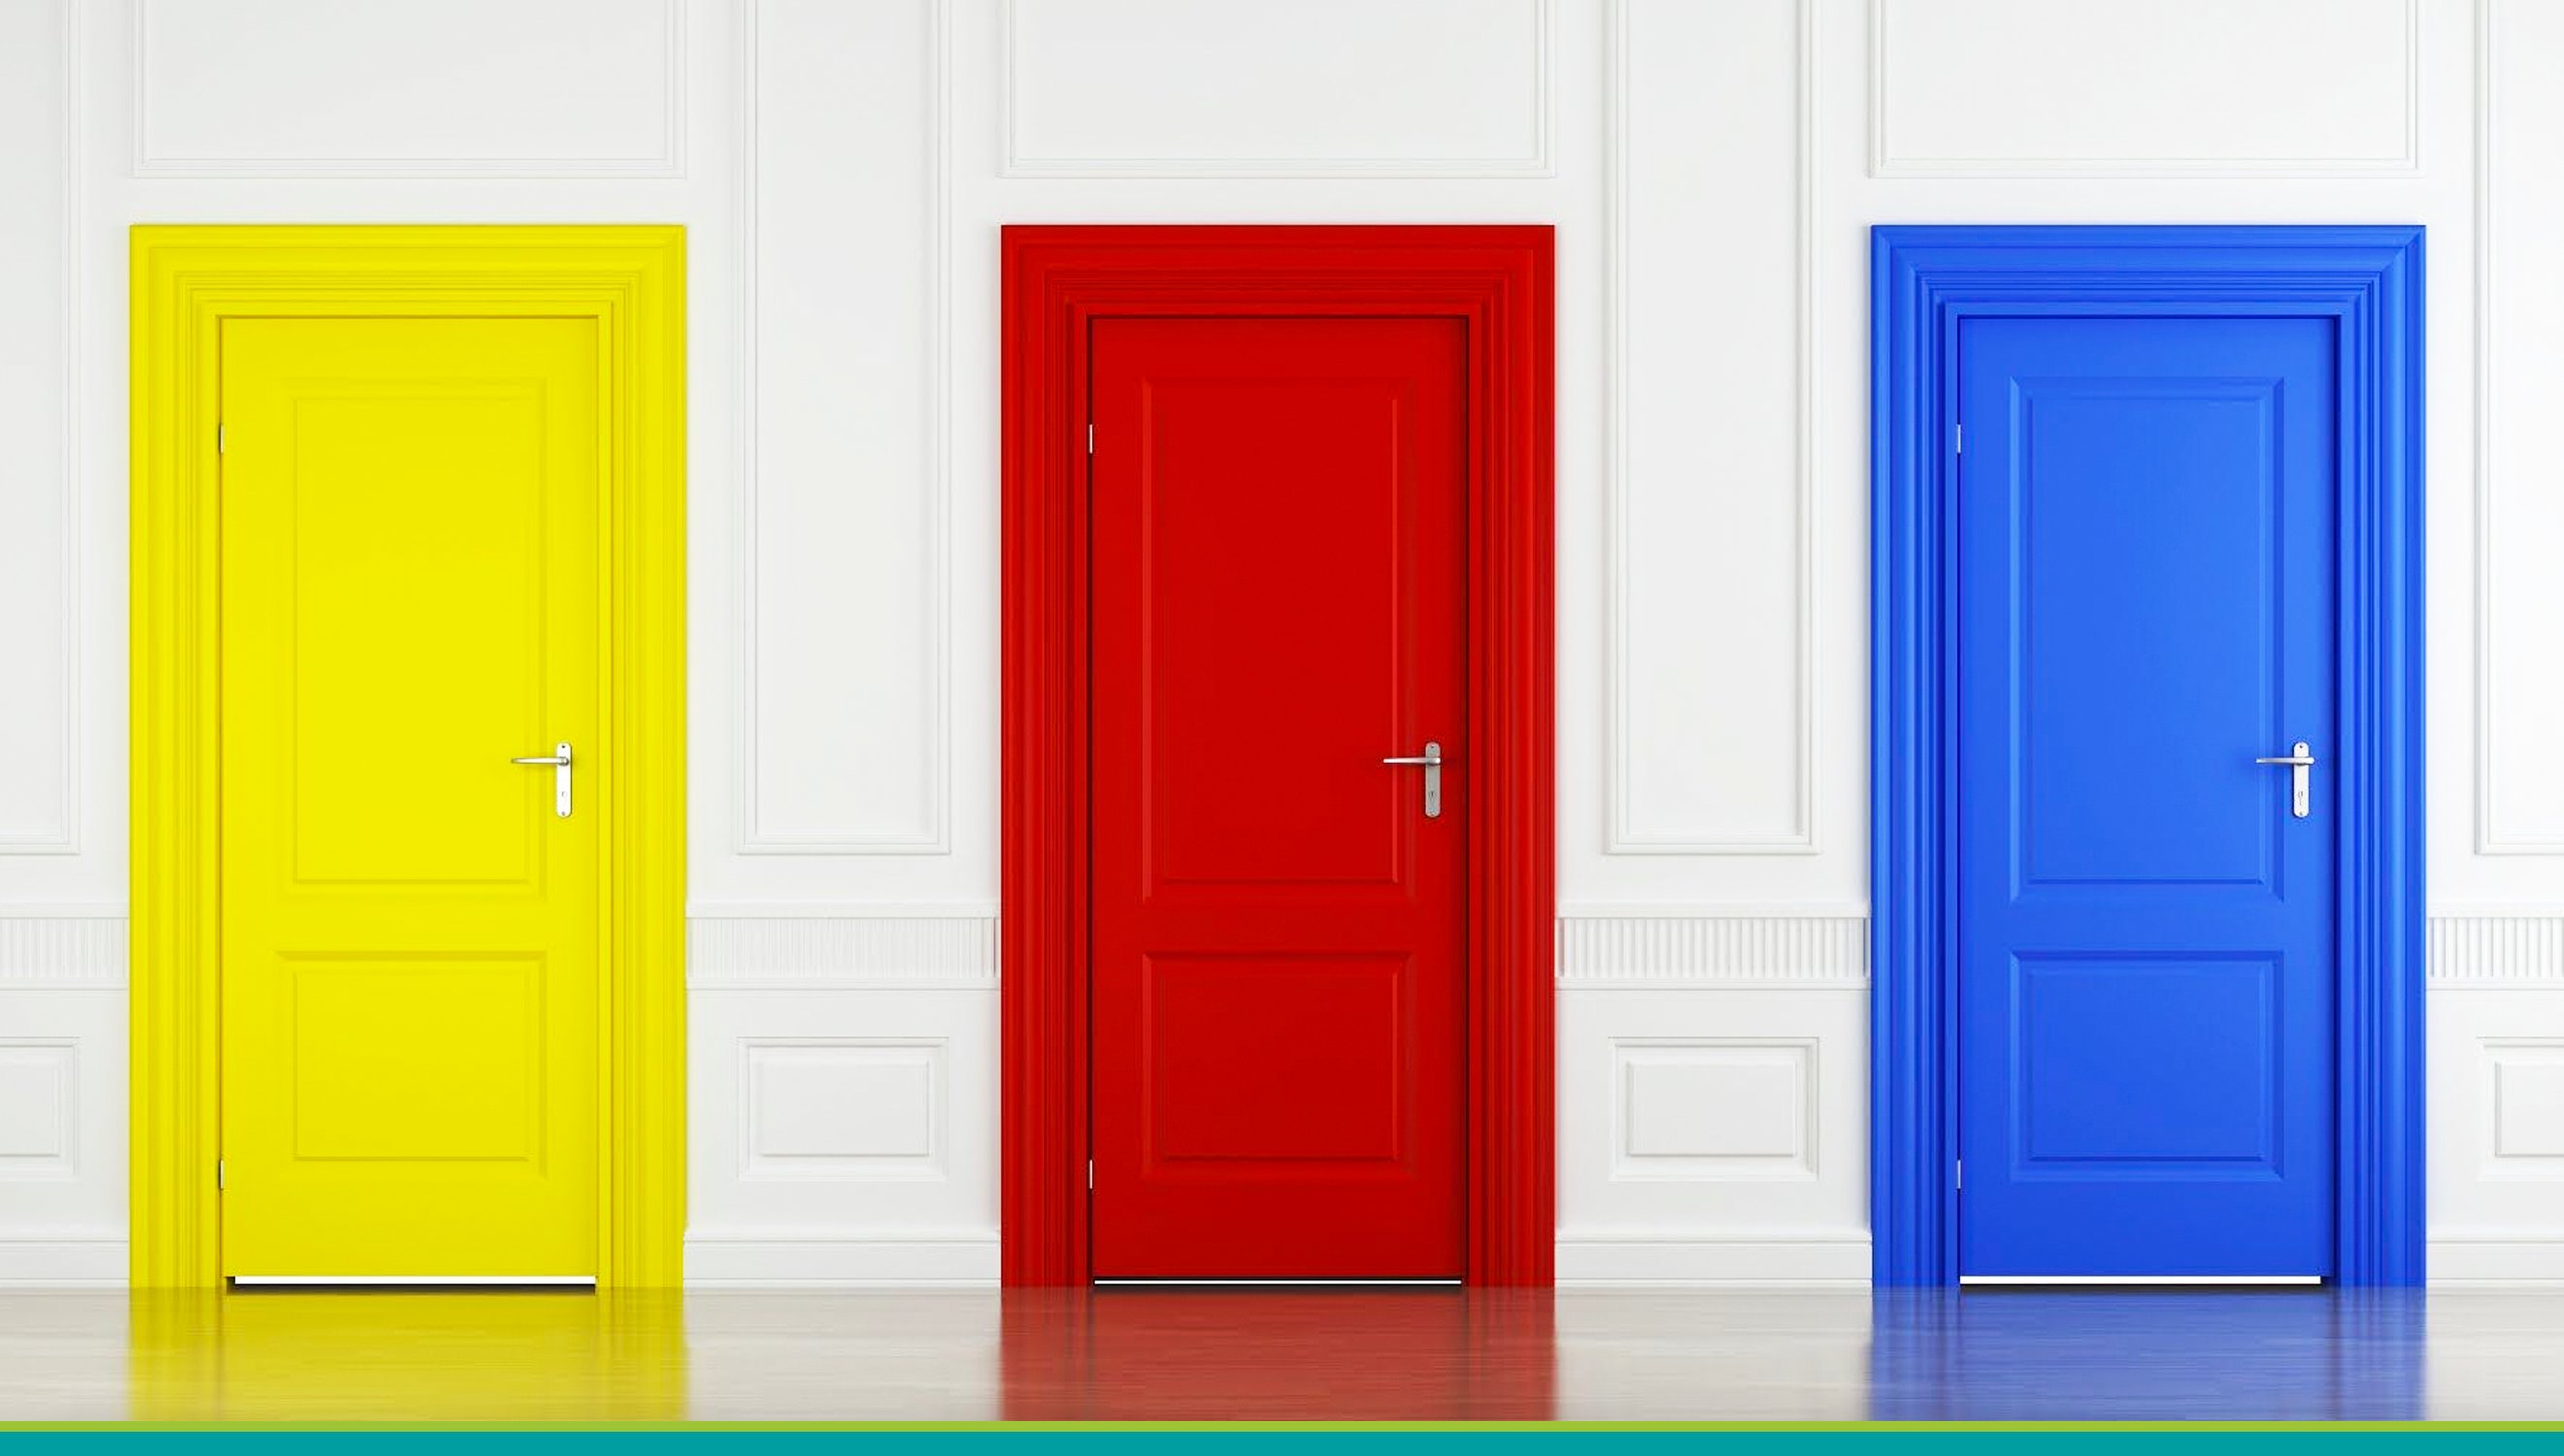 Do you know how to renovate colored doors? Check out this step by step guide!